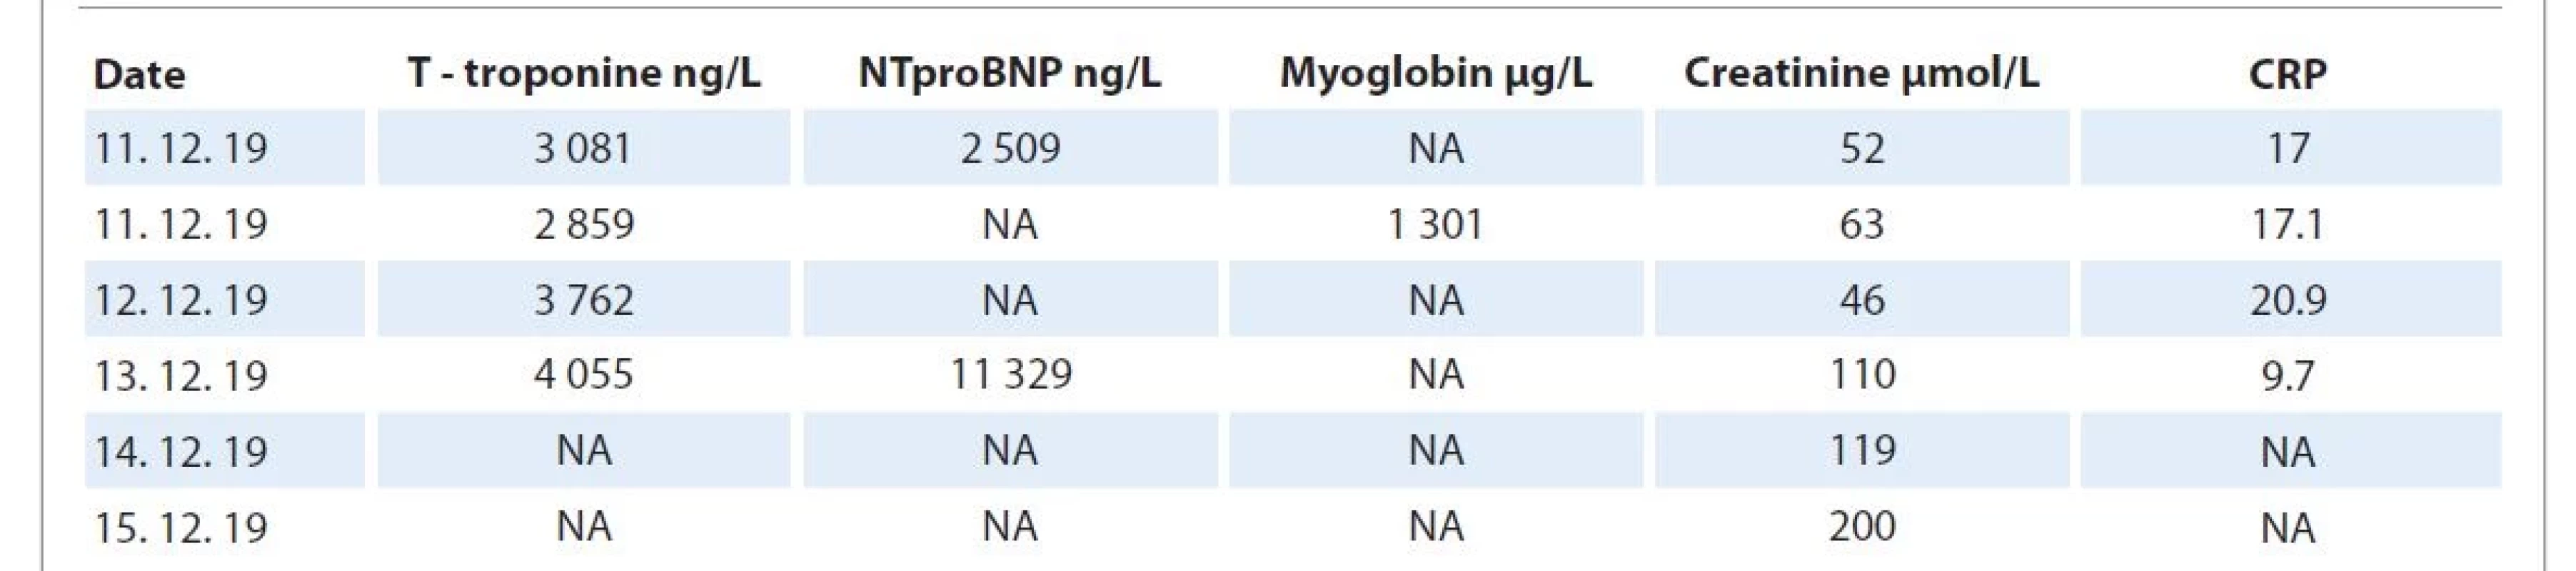 Laboratory test results of a 59-year-old female patient with myocarditis.